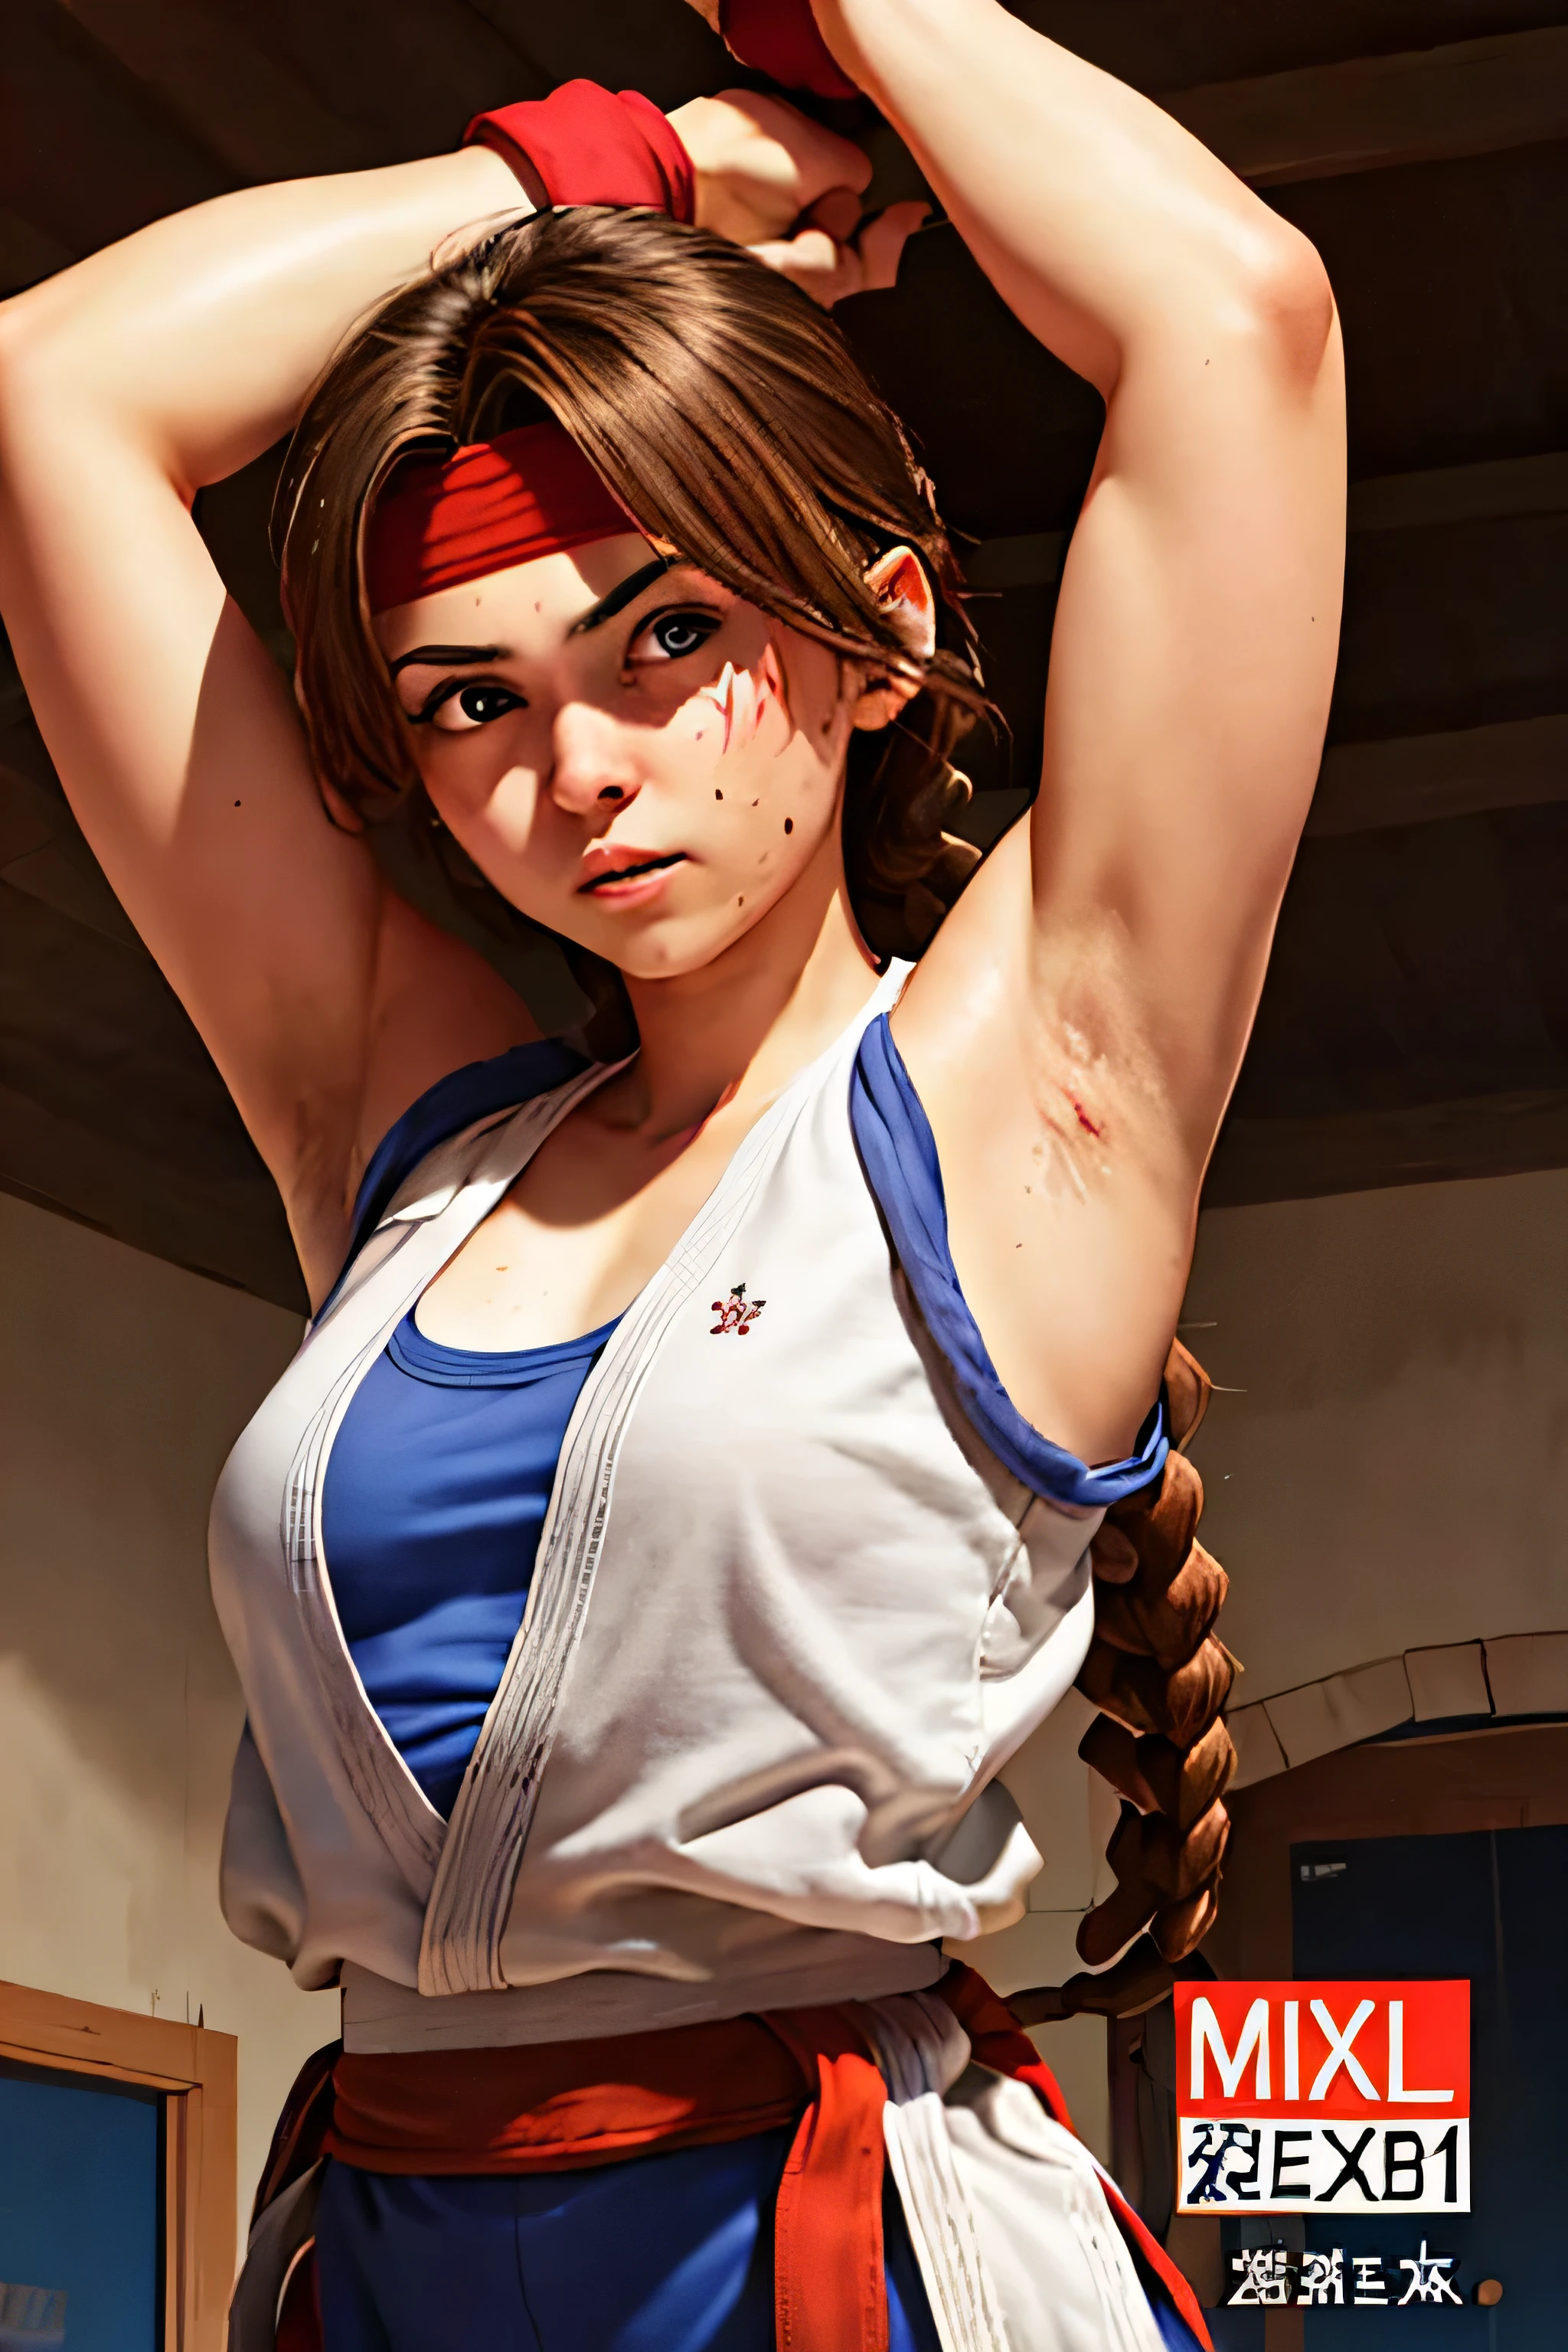 (masterpiece, best quality, high resolution, absurdities, unity 8K wallpaper, CG:1 extremely detailed:1), (illustration:1.0), 1girl((21 years, defined body, young woman, young adult, medium-big breasts)), solo, yurims, headband, dougi, spandex, gloves,,arms up,armpits, armpits,sweat,sweaty,sweaty armpits,awesome armpits,sweating ,sleeveless,exhausted,tired, wearing arm bands,arms raised,very tired,sweating,arms raised,both arms raised,sweaty,red arm warmers,red arm bands